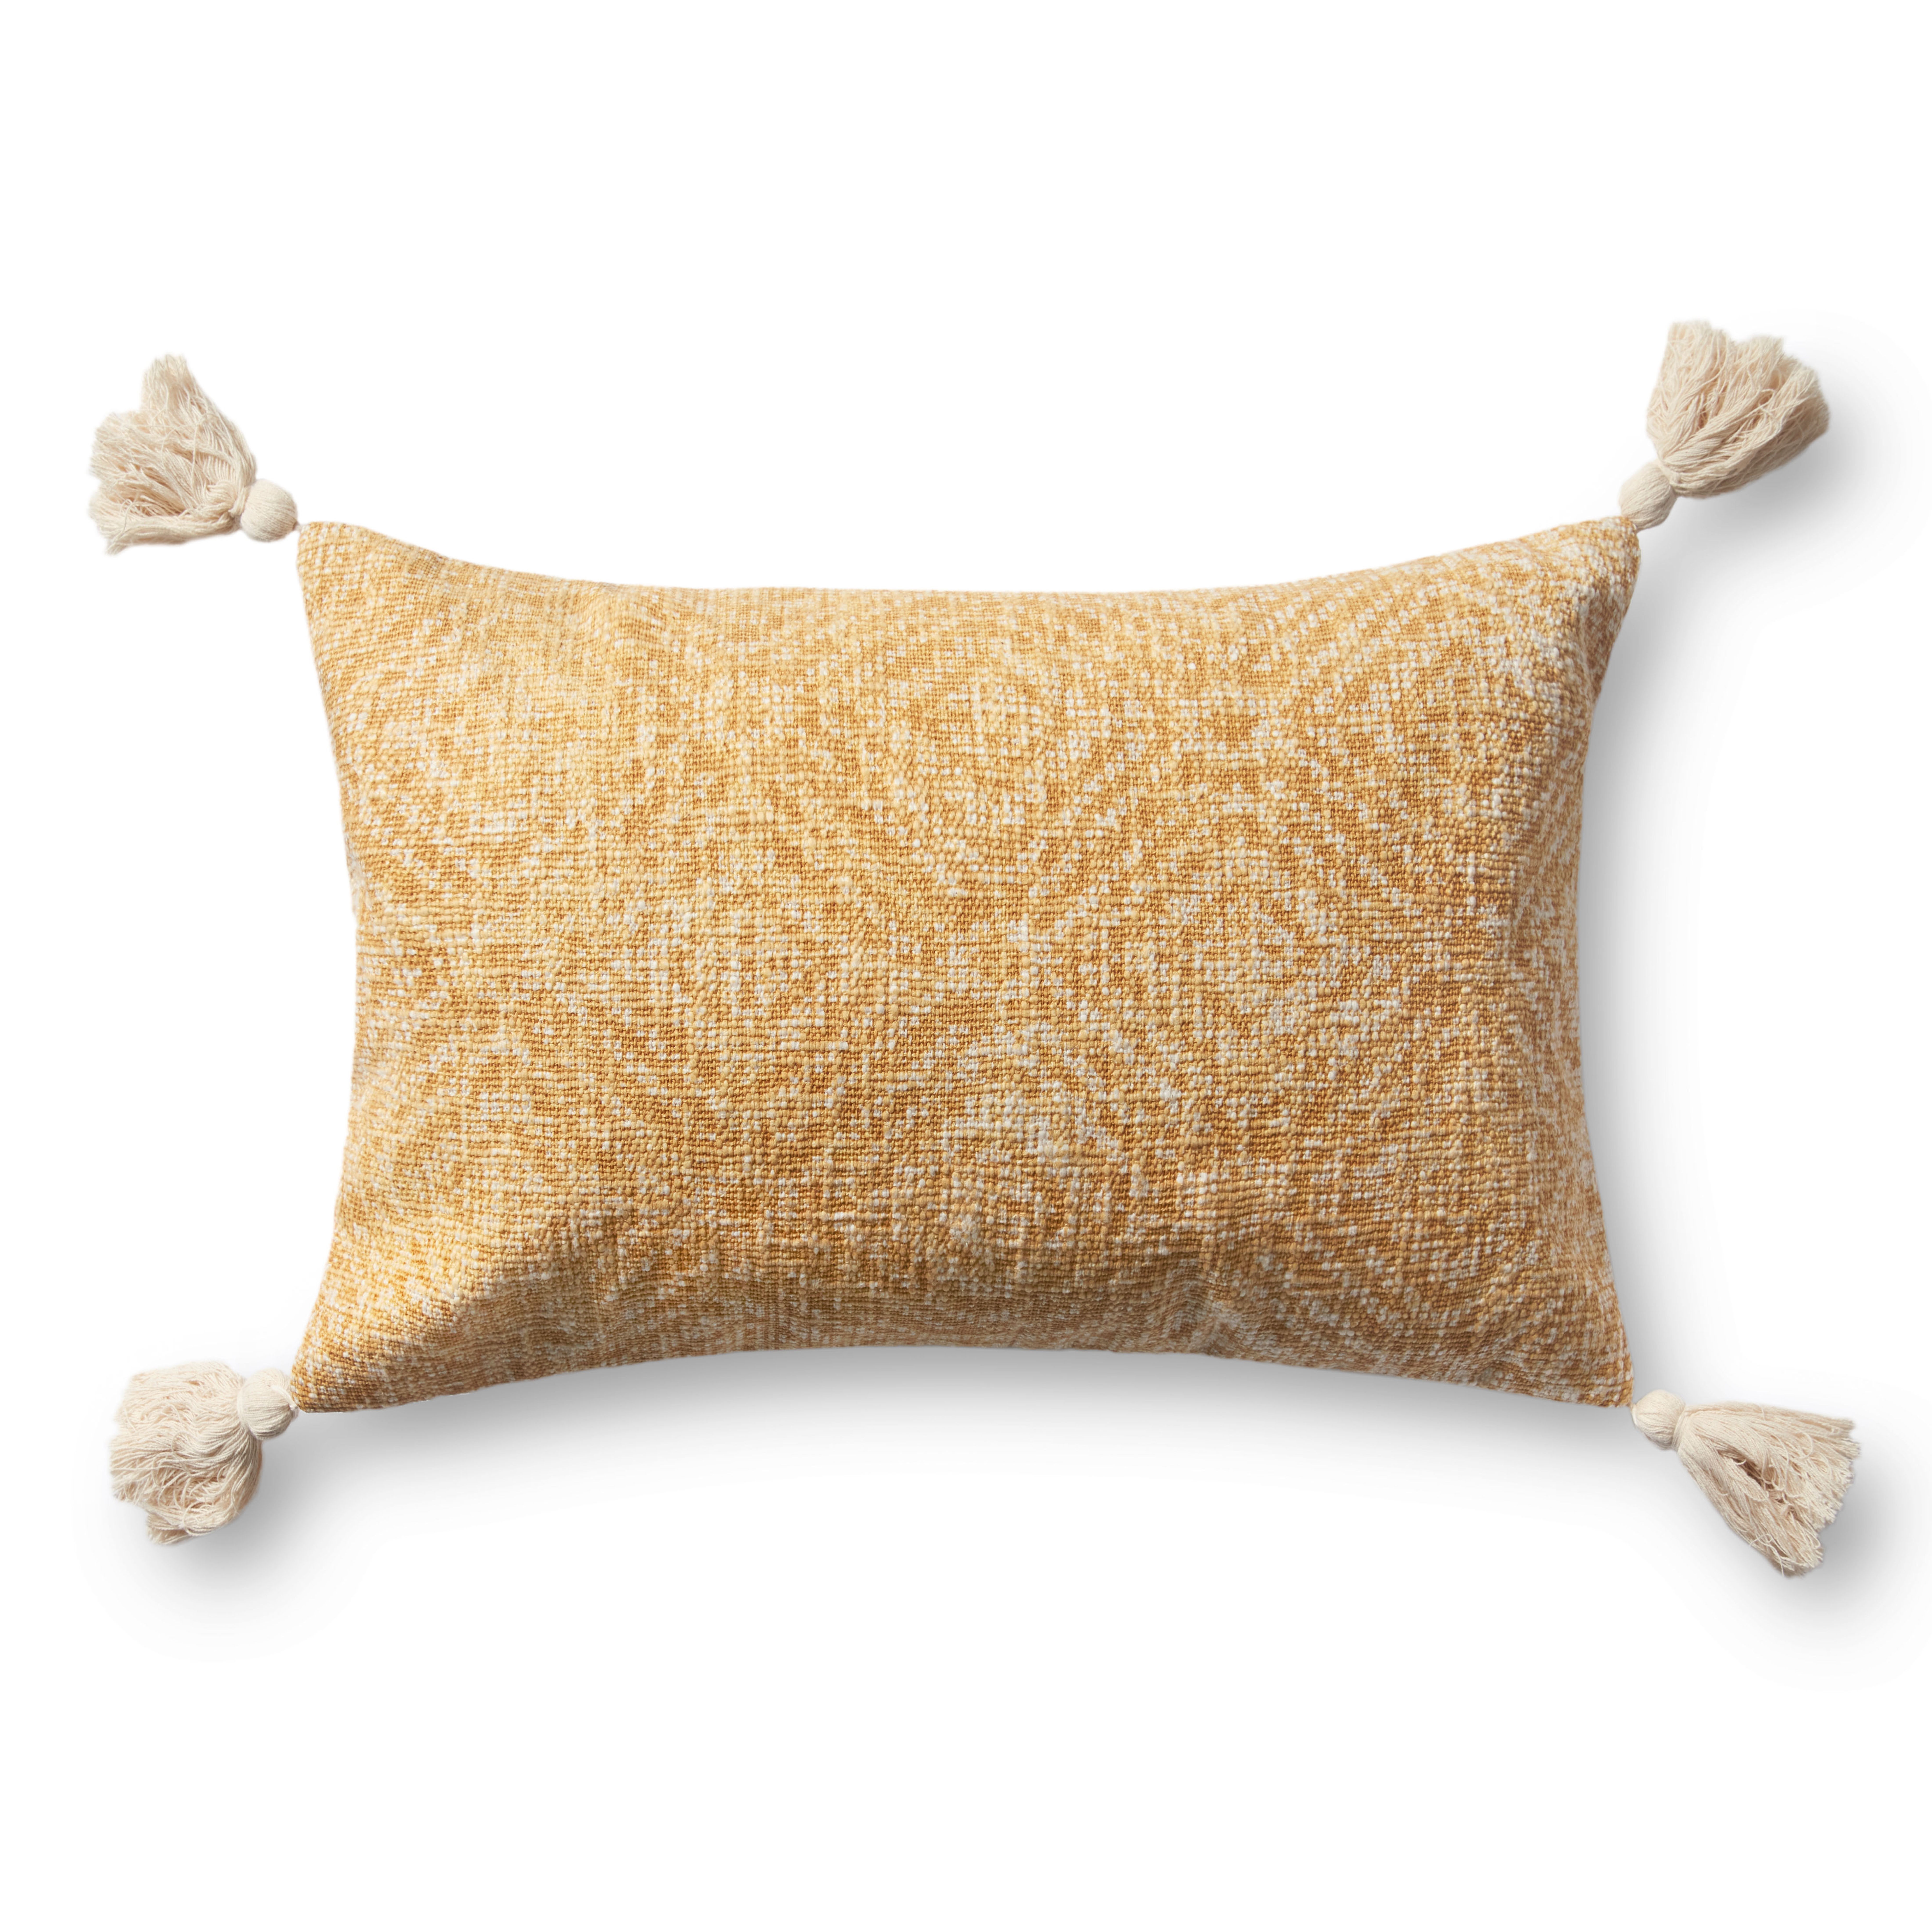 Loloi Pillows P0621 Yellow 13" x 21" Cover Only - Loloi Rugs